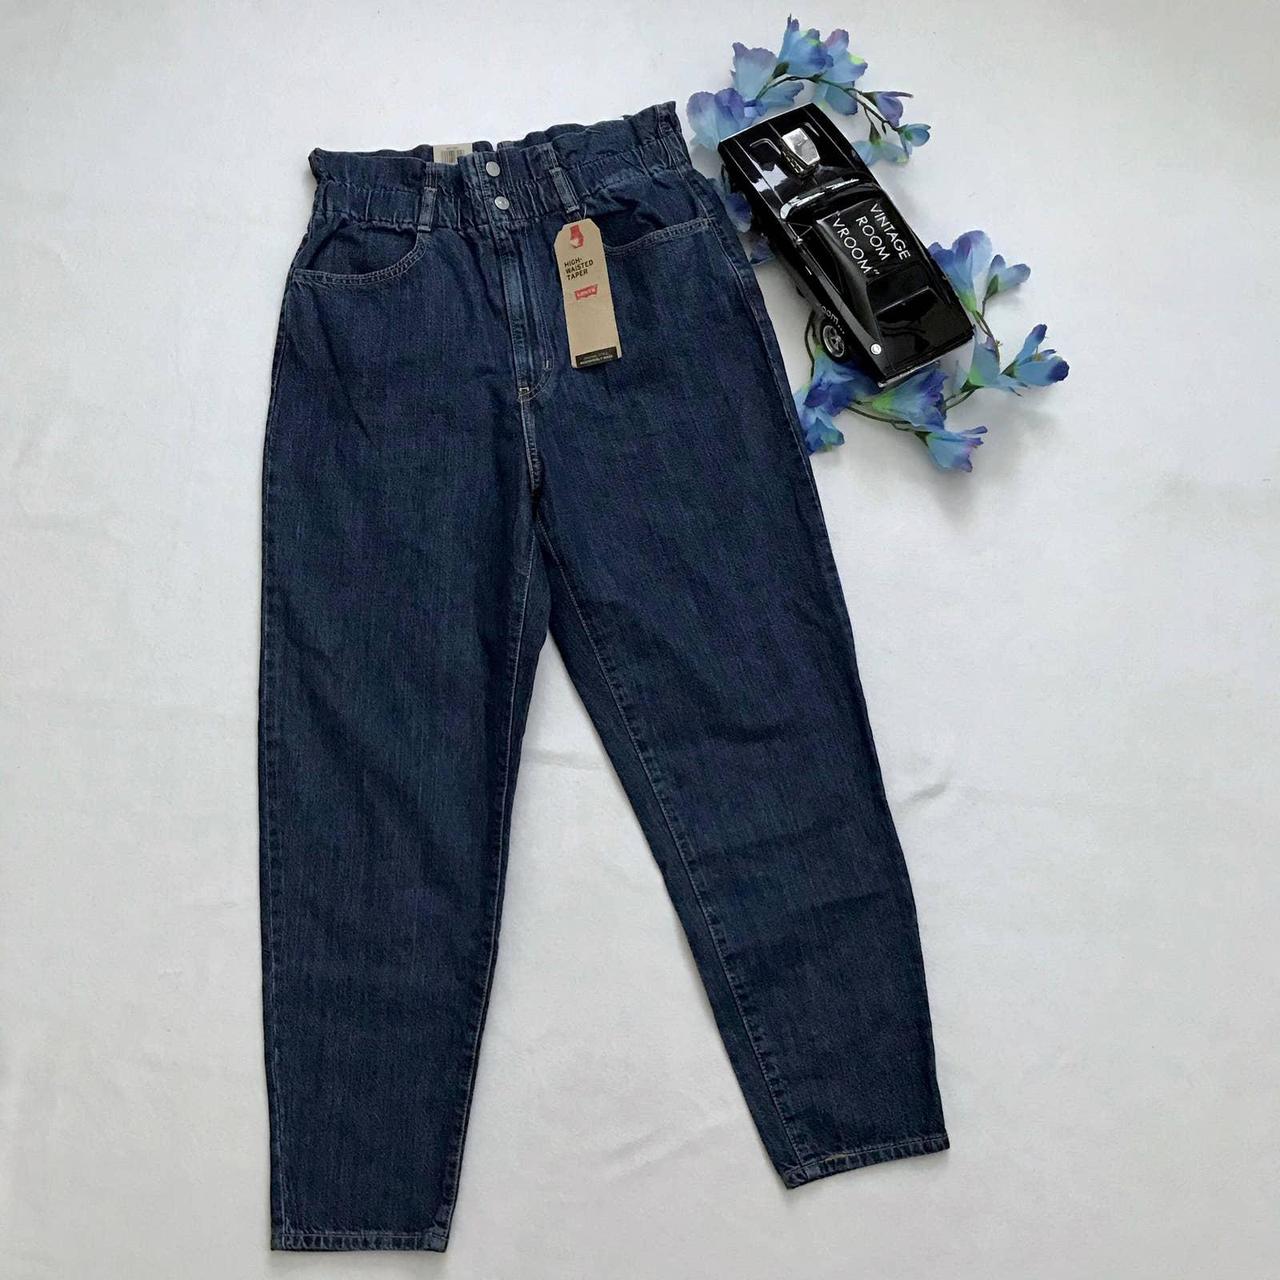 Levi's high waisted taper jeans in medium wash! - Depop